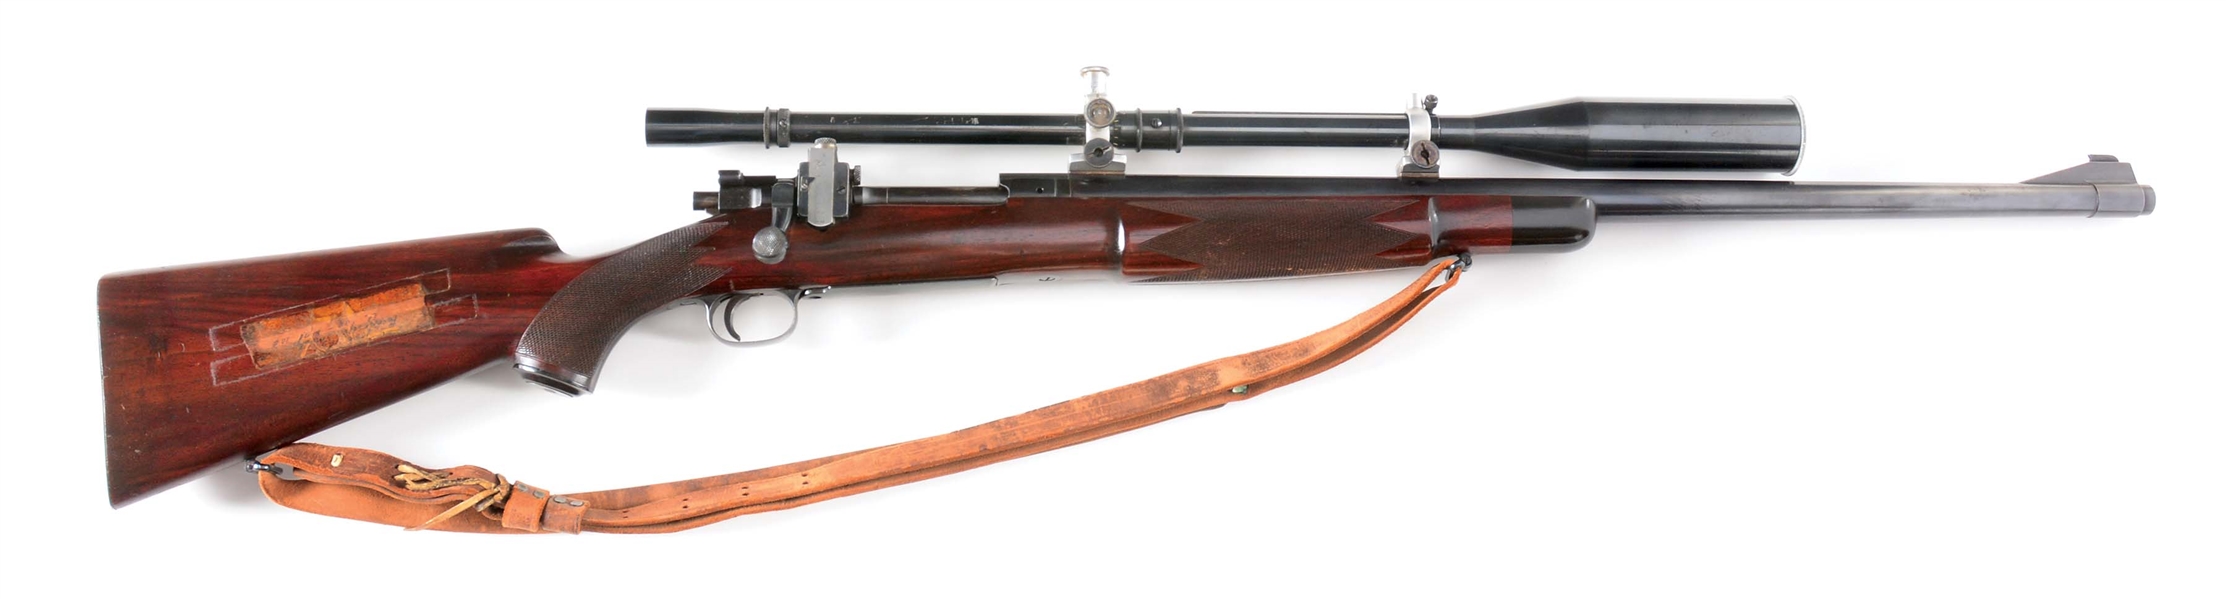 (C) SUPERB ORIGINAL CONDITION GRIFFIN & HOWE 1903 SPRINGFIELD LONG RANGE TARGET RIFLE WITH FECKER SCOPE. 